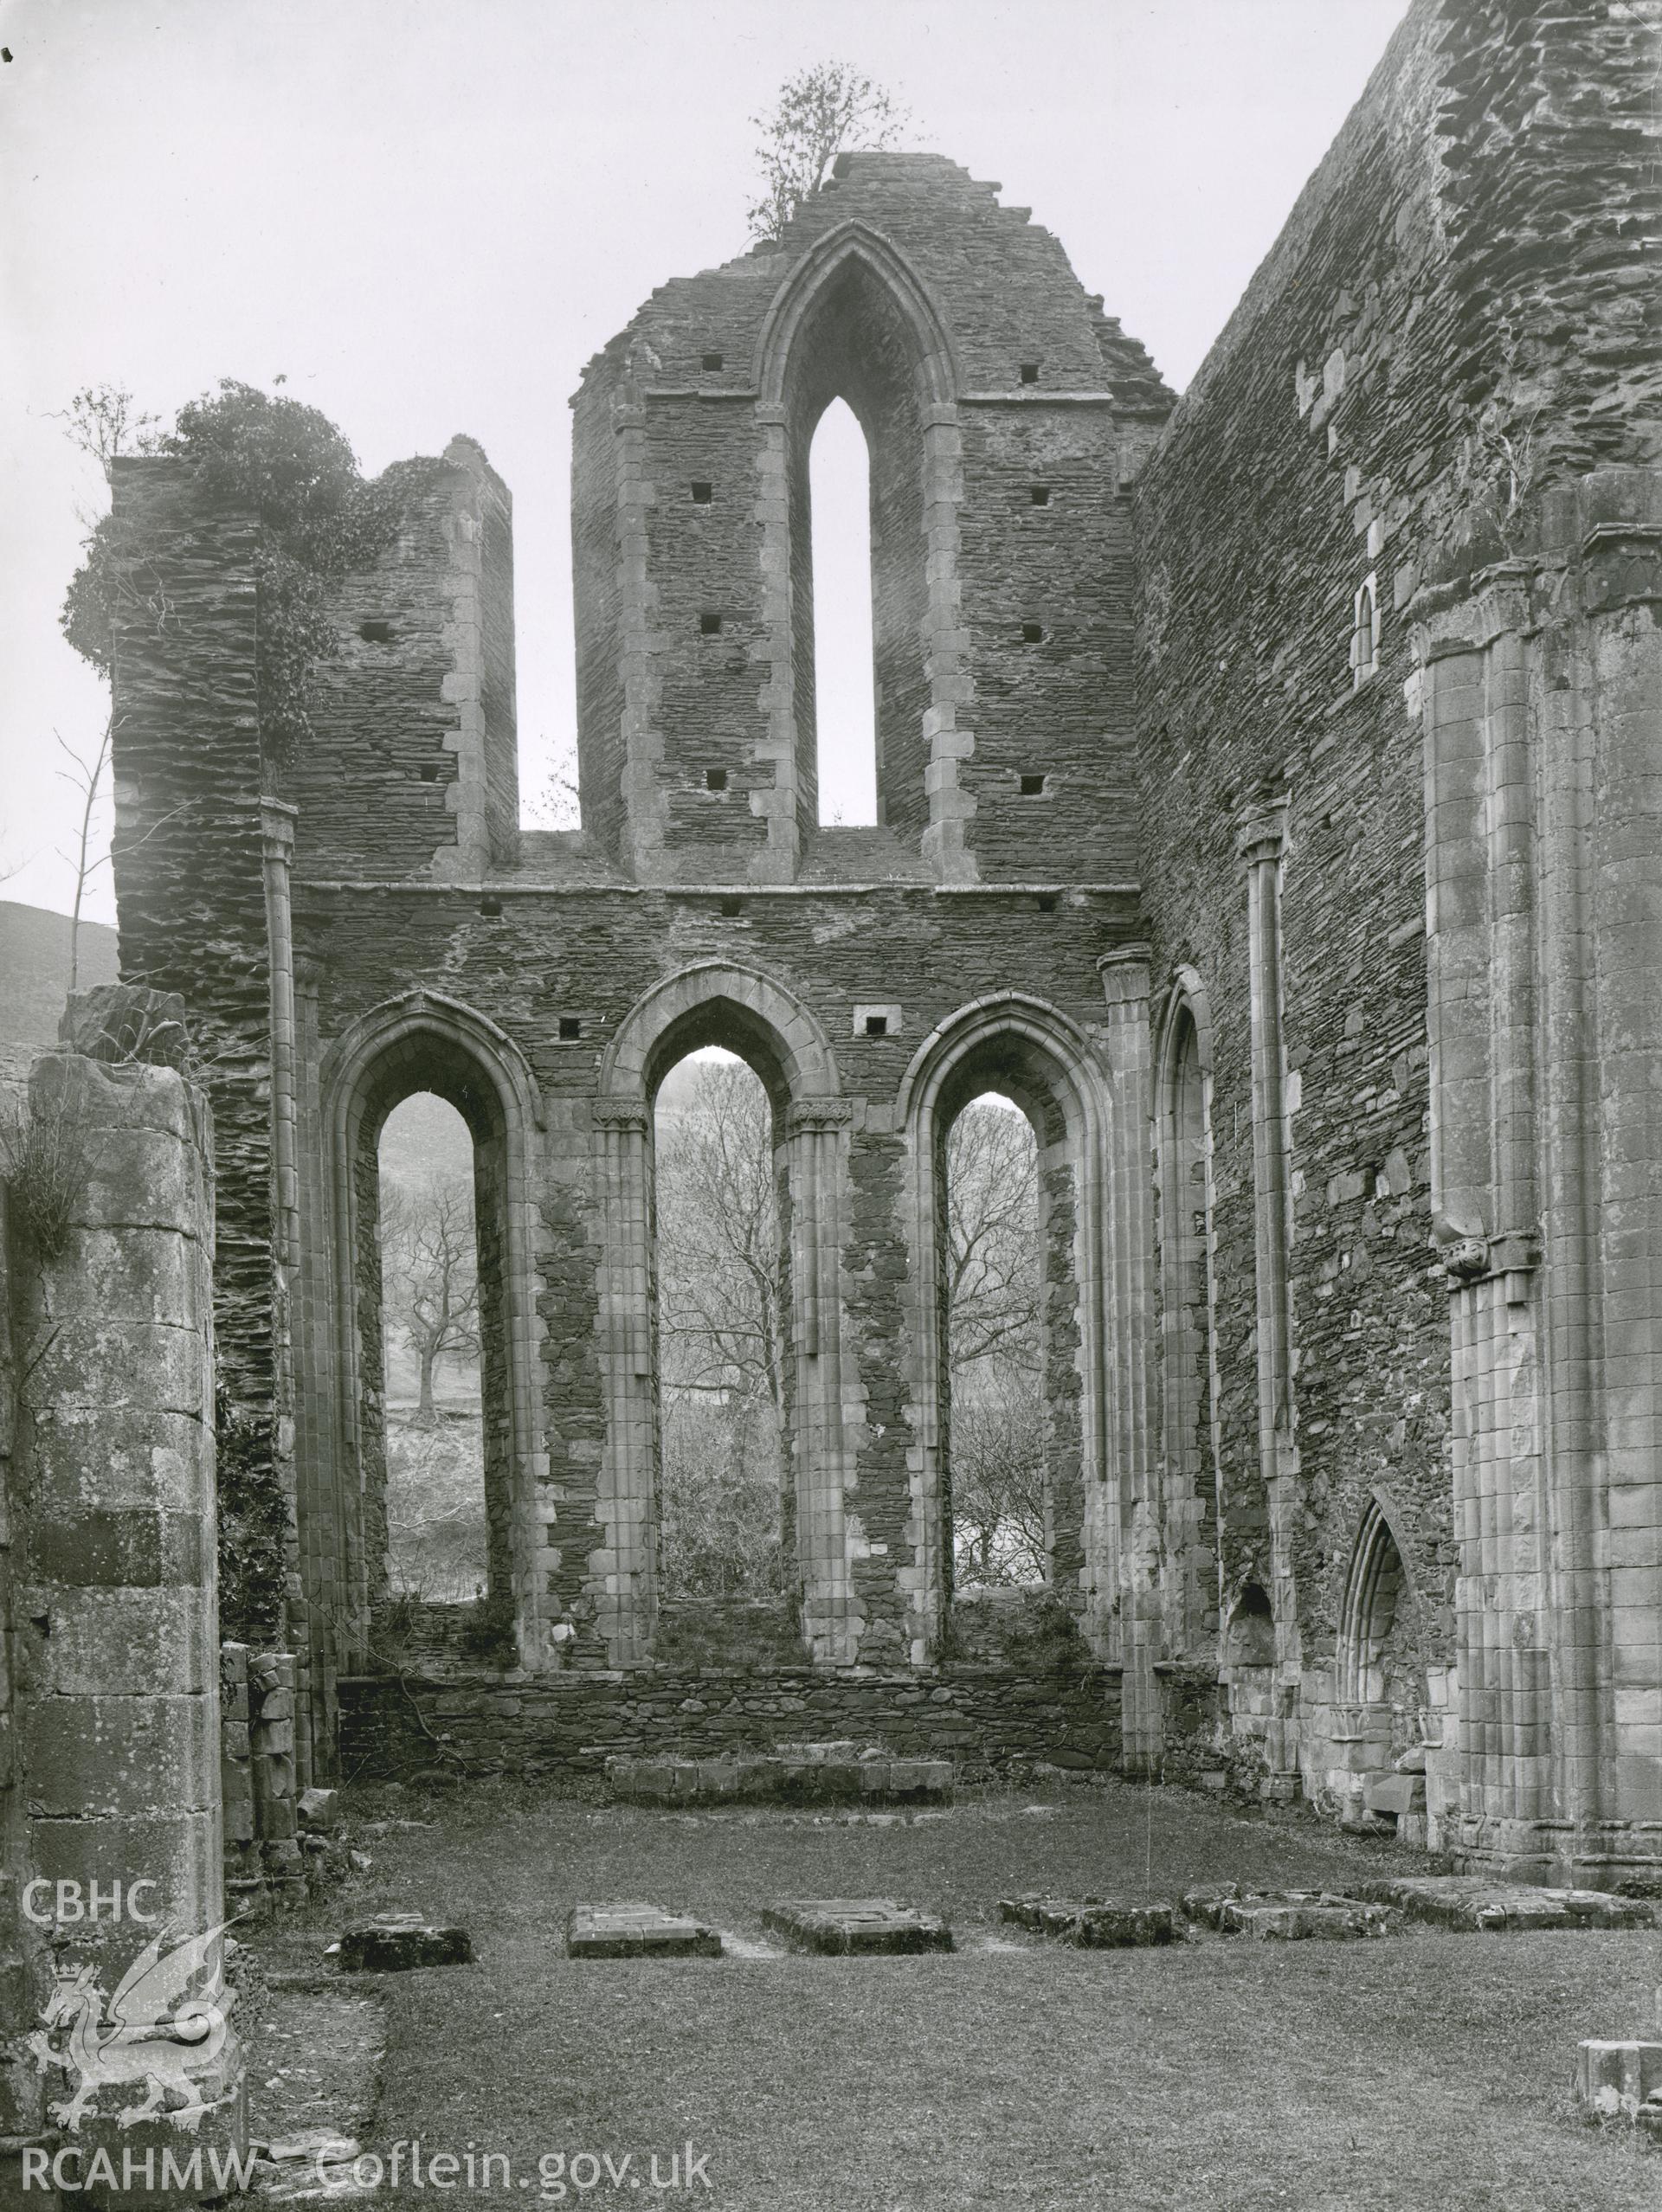 Digitised copy of a black and white photograph showing east end of choir at Valle Crucis Abbey, taken by F.H. Crossley, 1949. Copied from print as negative held by NMR England (Historic England).